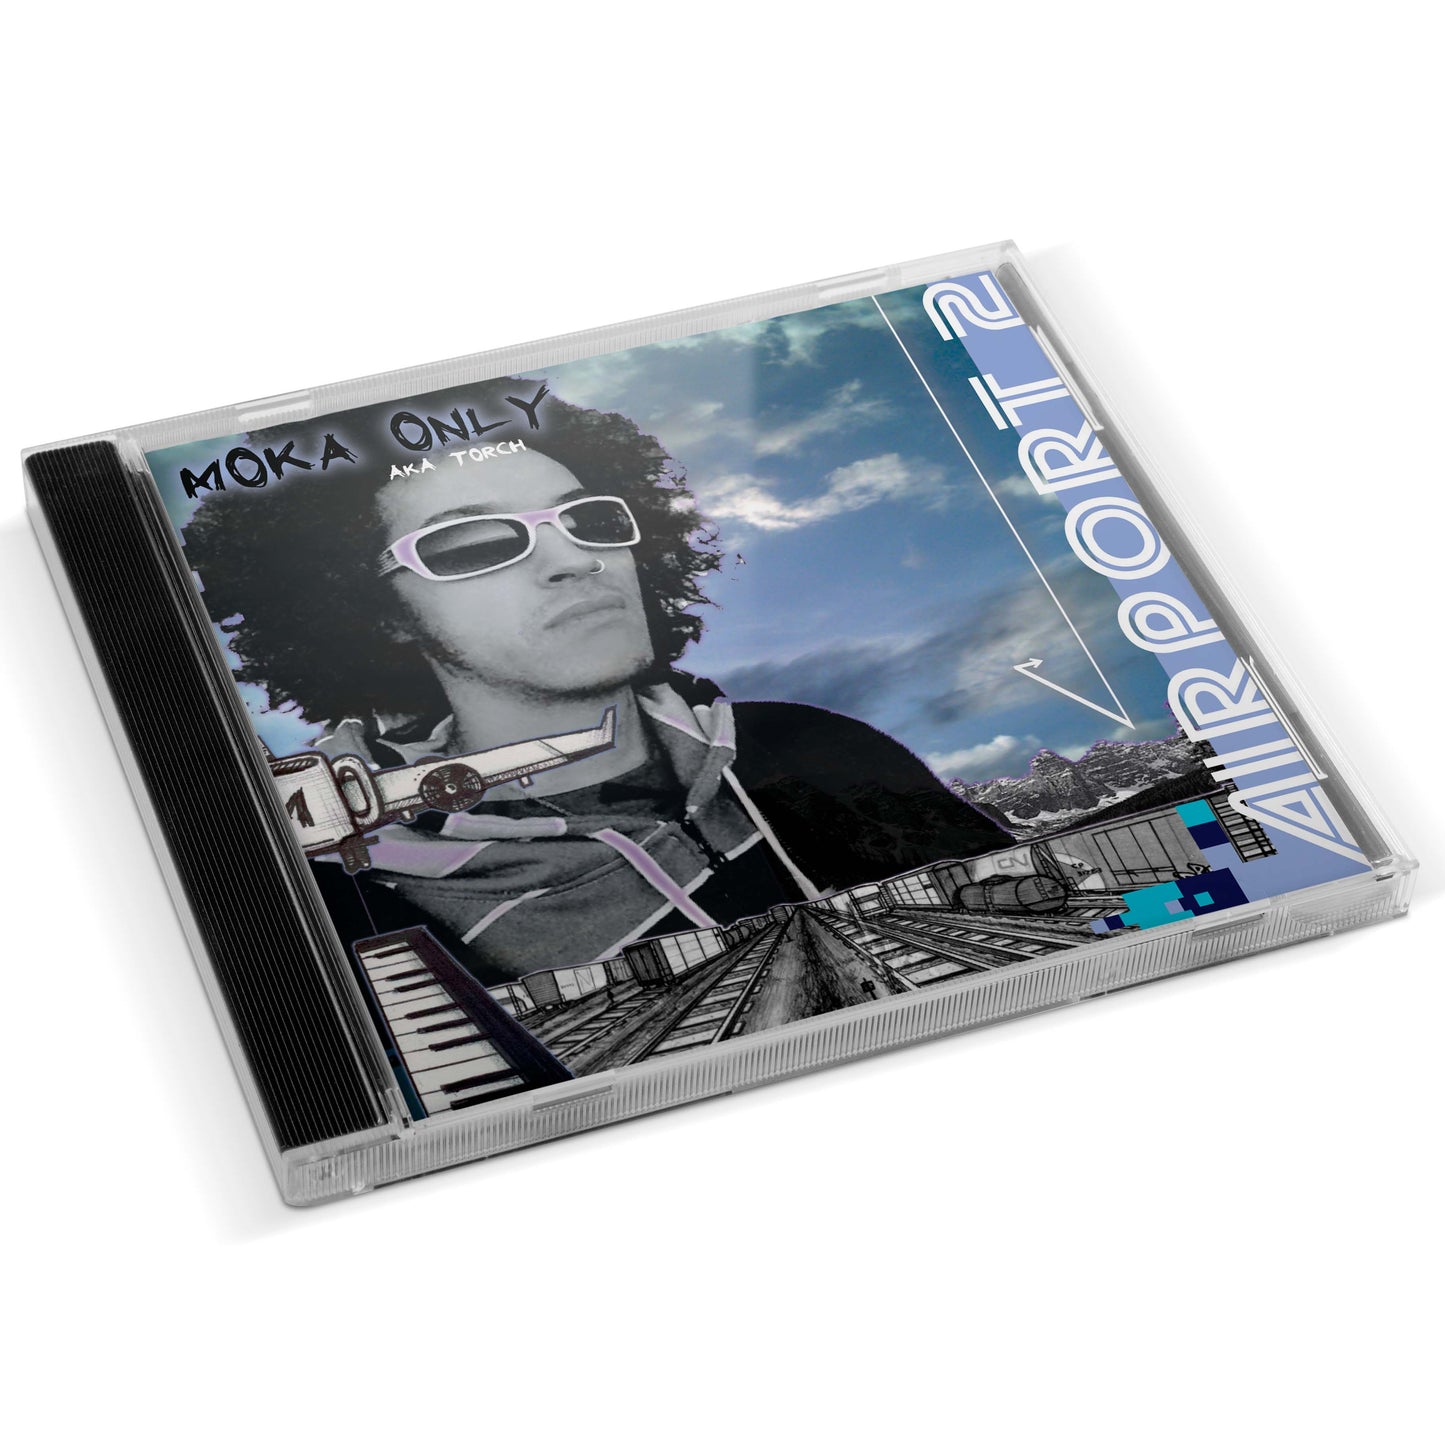 Moka Only - Airport 2 CD